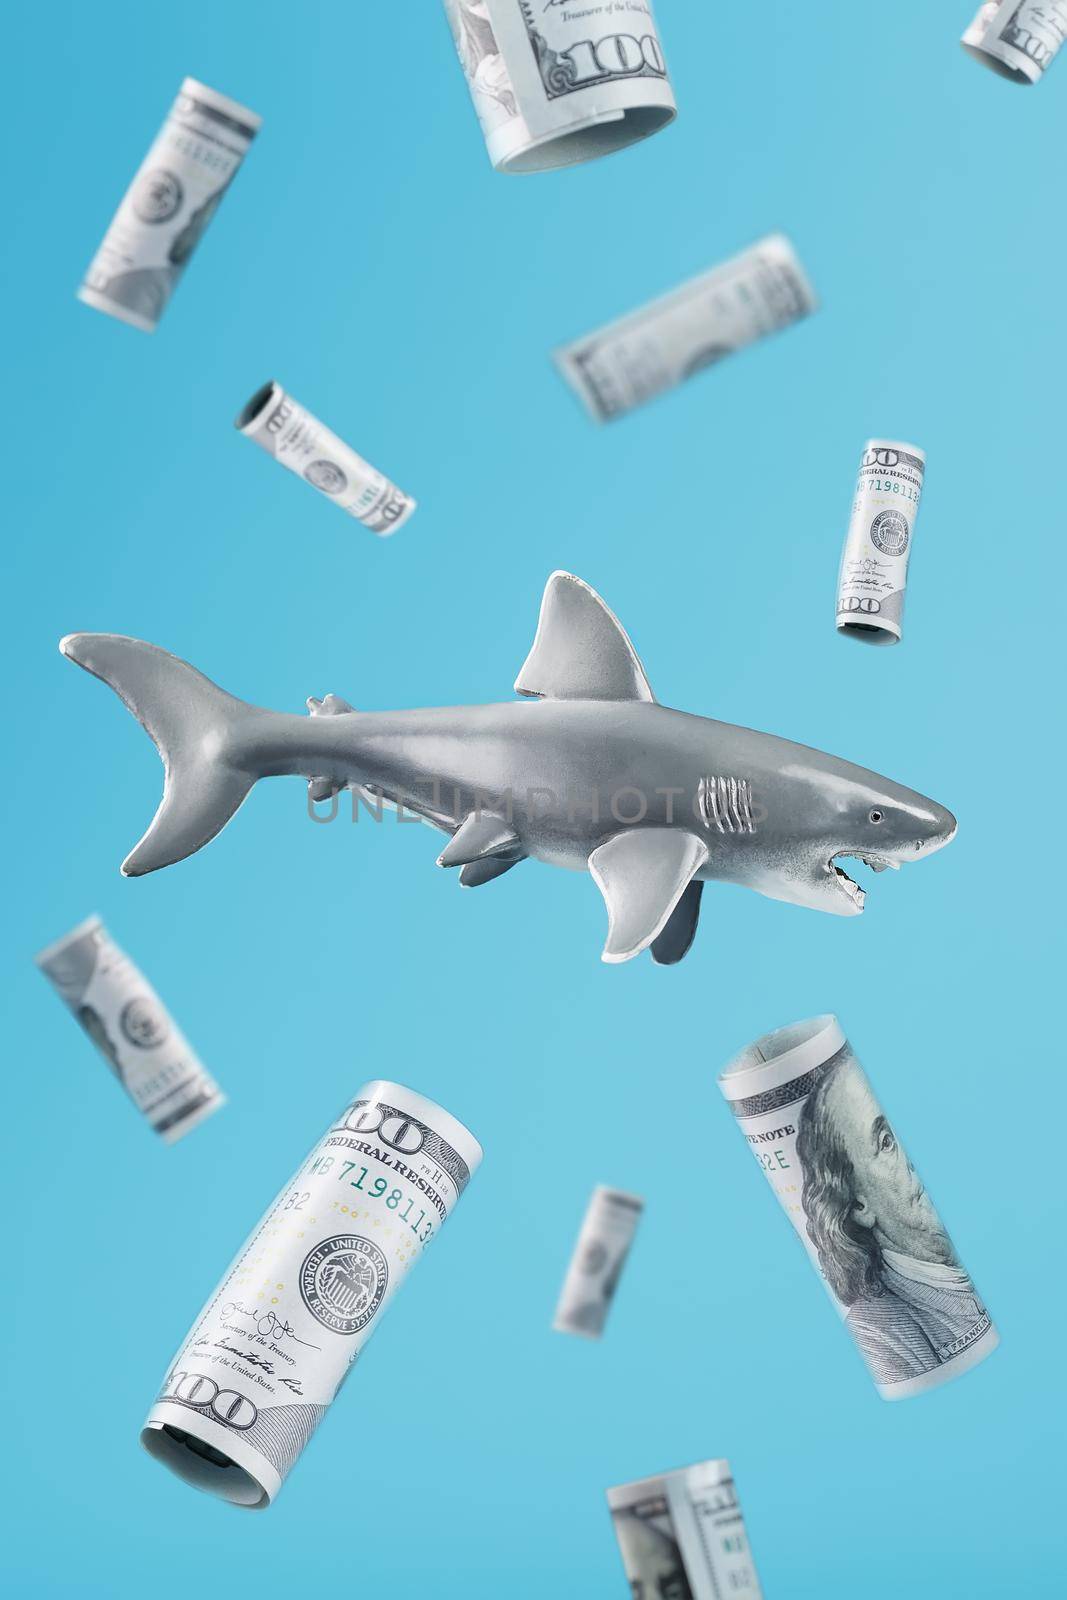 Toothy shark in the center surrounded by 100 dollar bills on a blue background. by AlexGrec